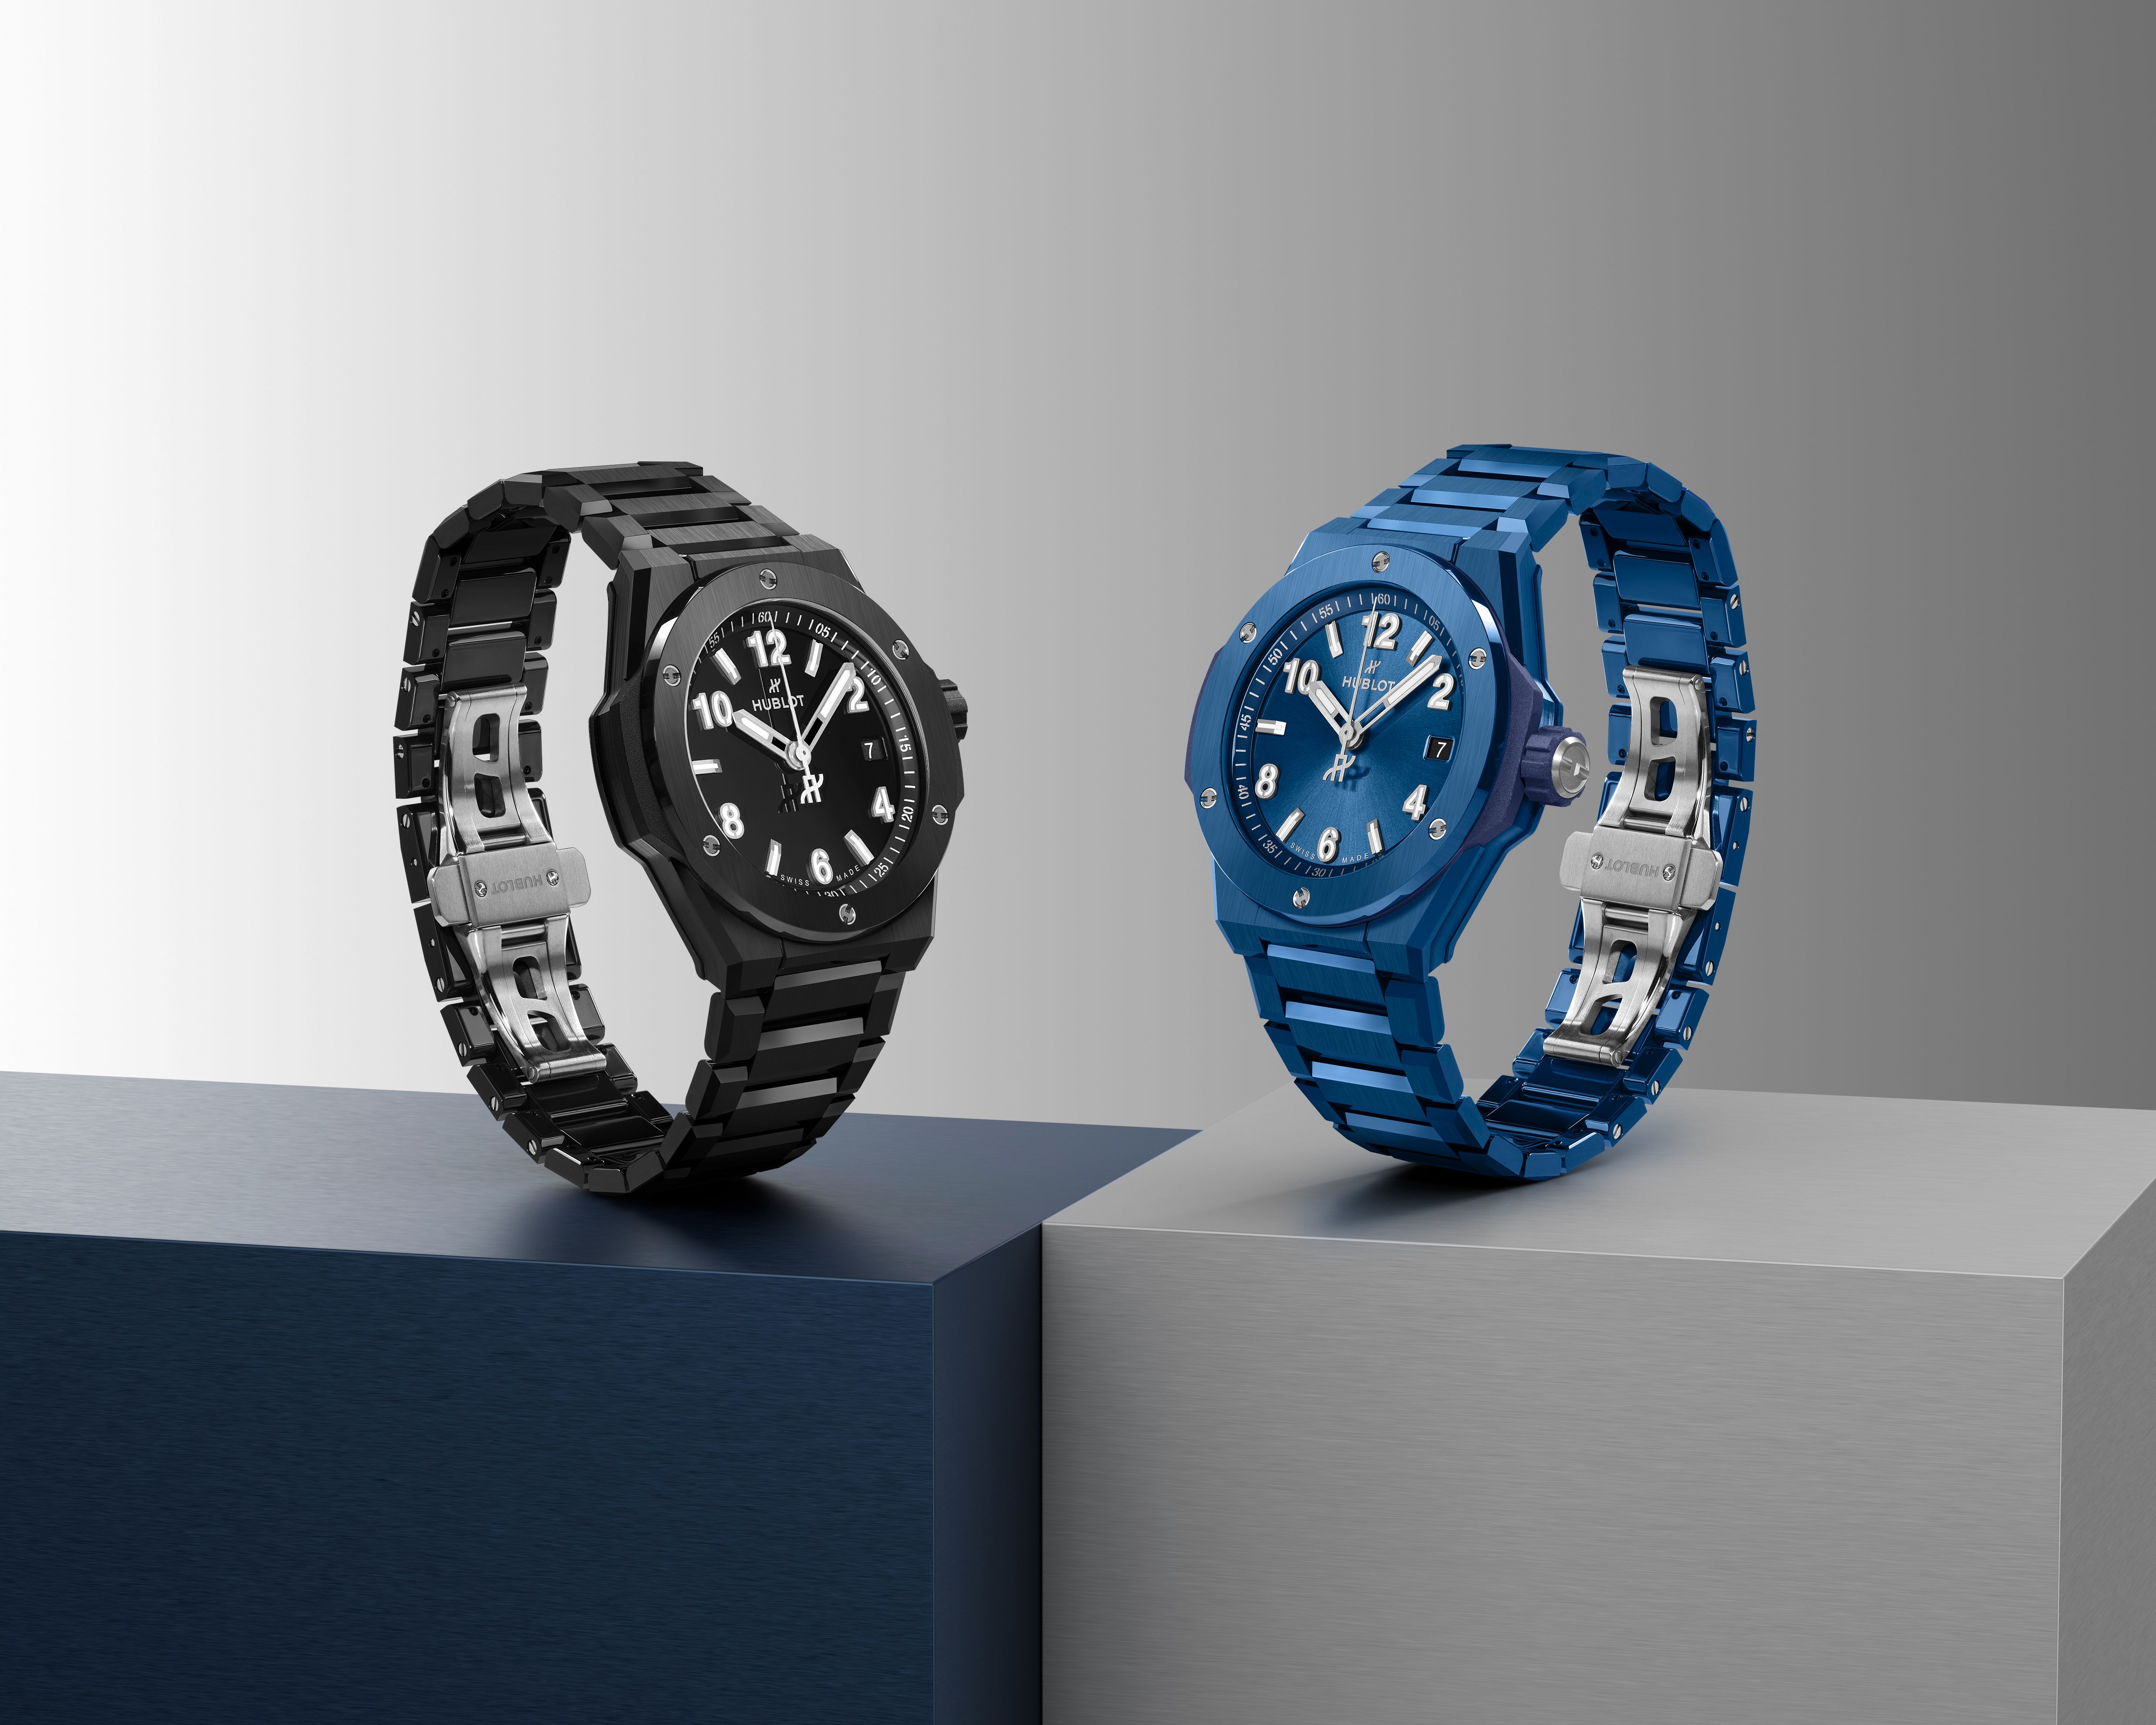 Ceramic variants of the Big Bang Integrated Time Only 38 mm series